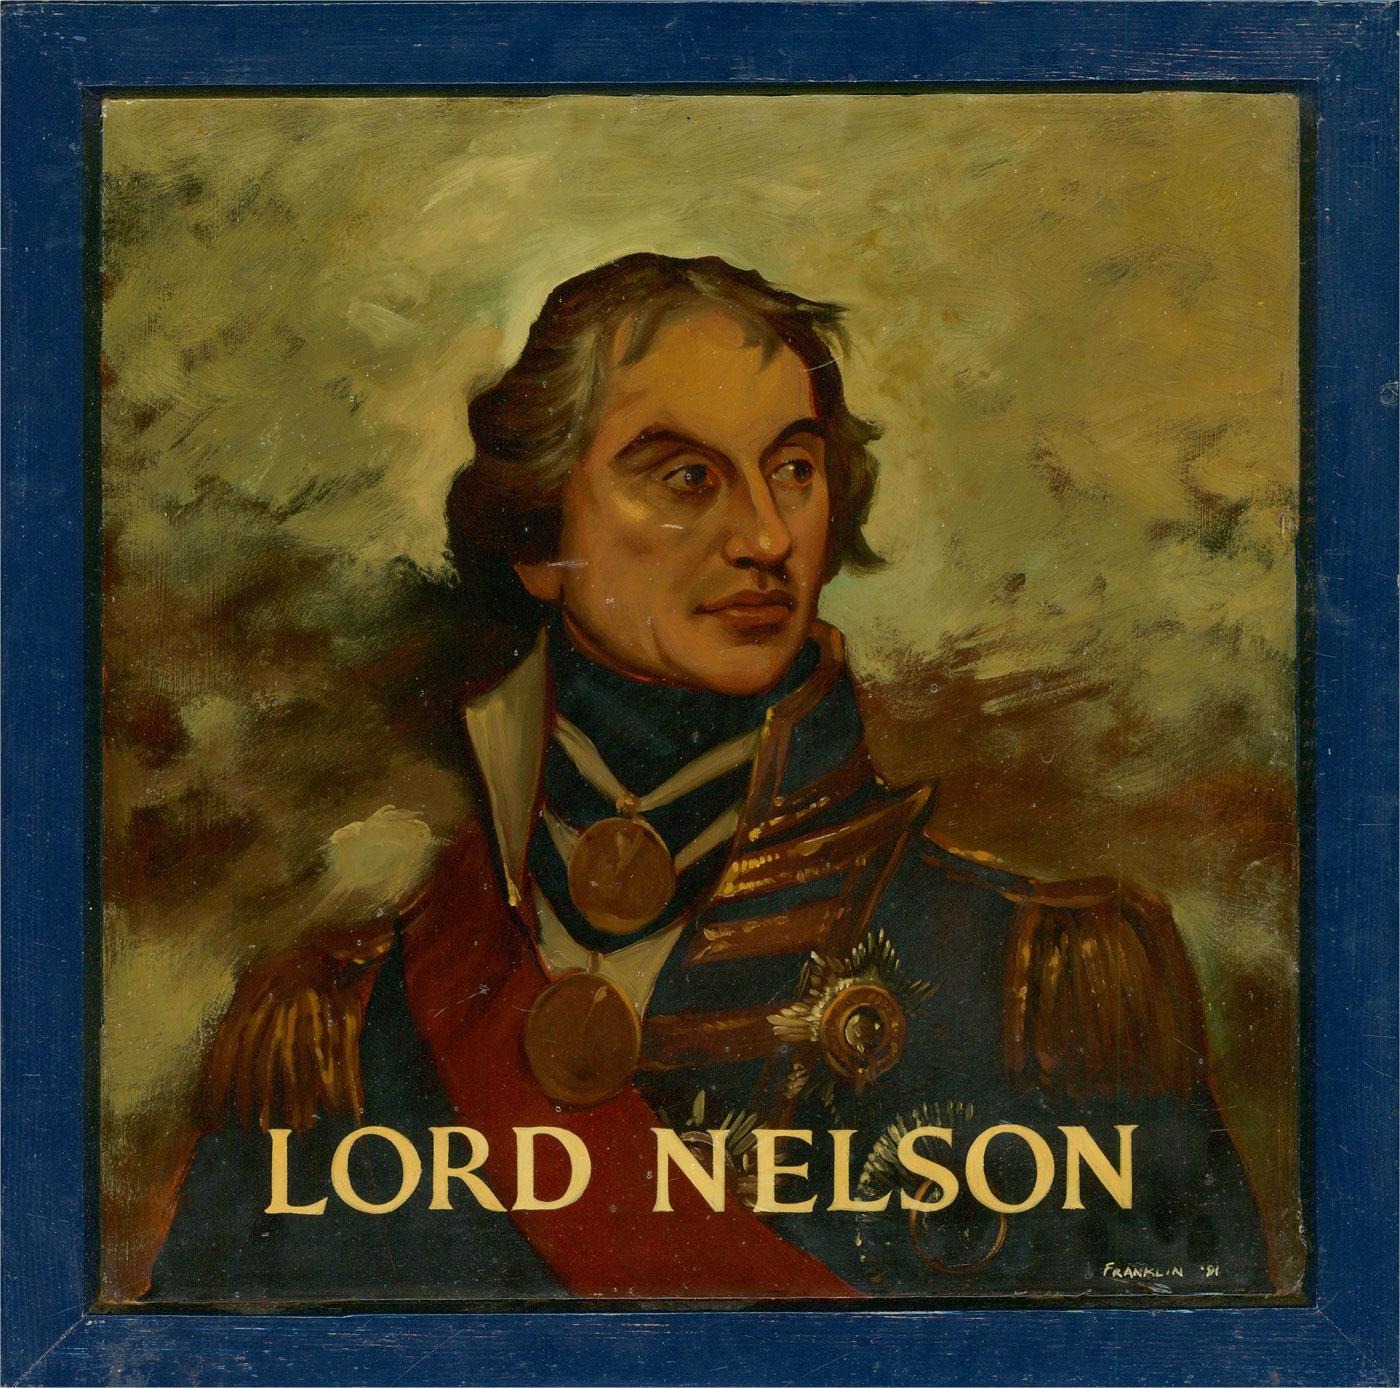 A striking and accomplished oil portrait of Lord Nelson. The artist has captured the imposing and battle hardened face of the great commander in great detail and character. The painting has been emblazoned with Nelson's name across the bottom and